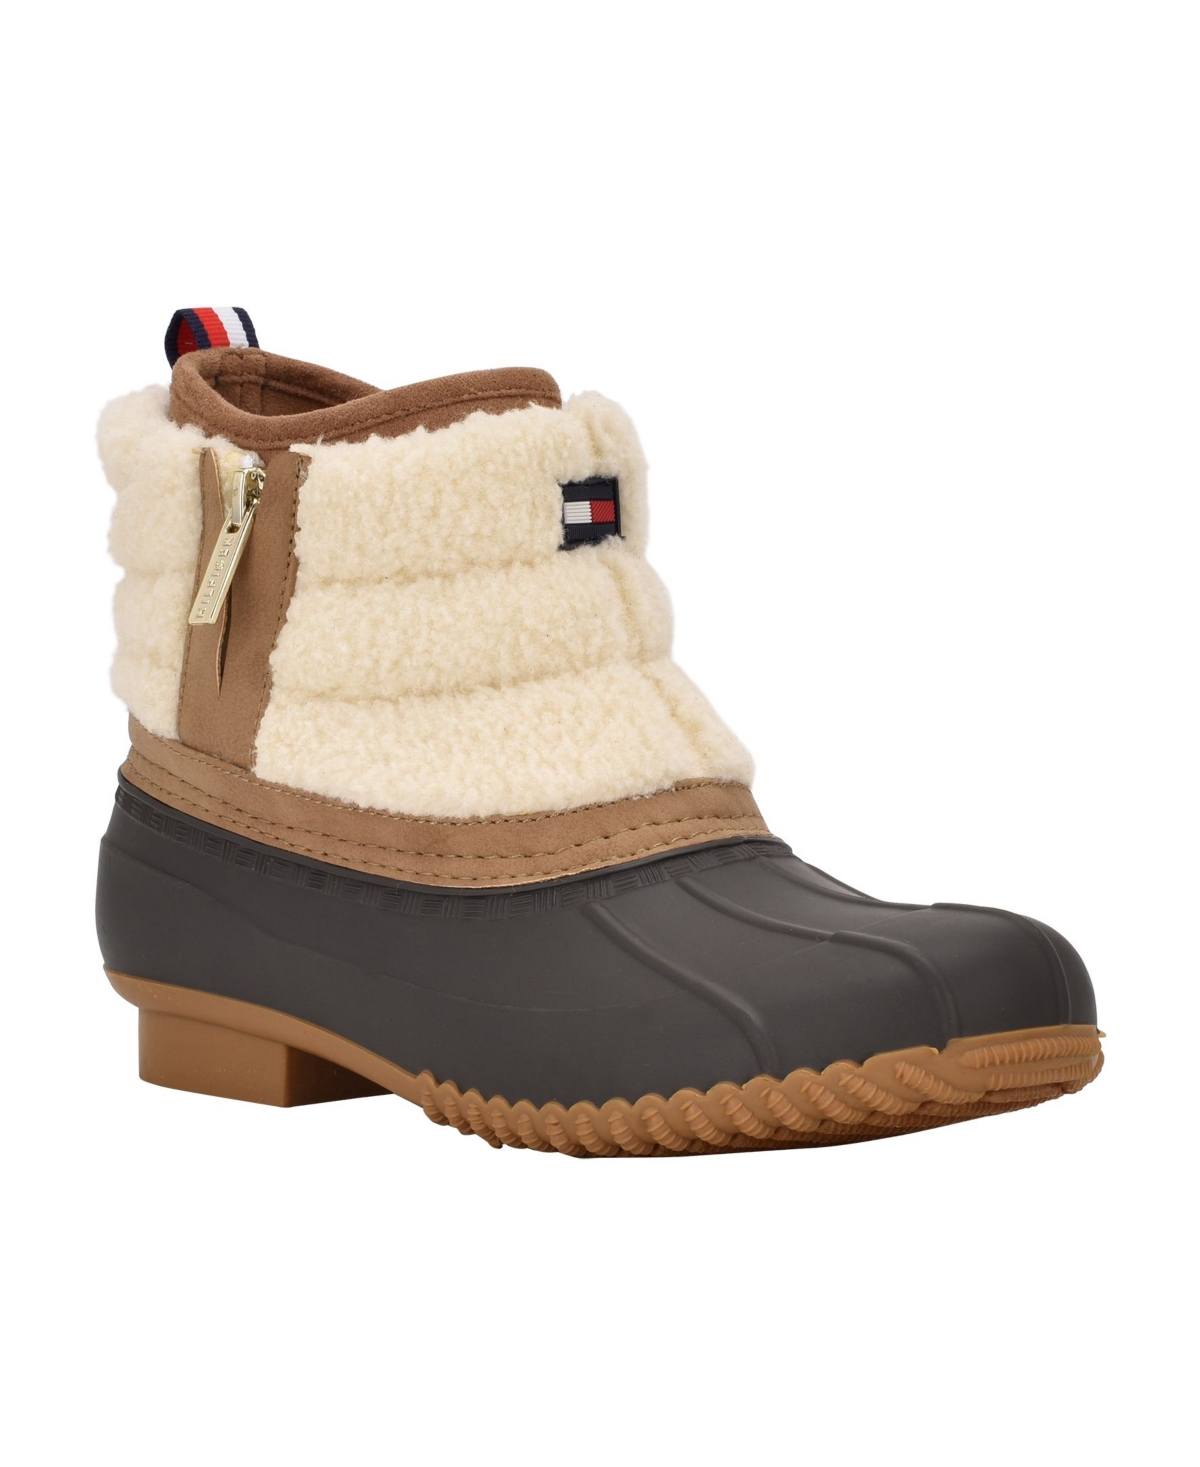 UPC 195972709843 product image for Tommy Hilfiger Women's Roana Zip Up Duck Booties Women's Shoes | upcitemdb.com